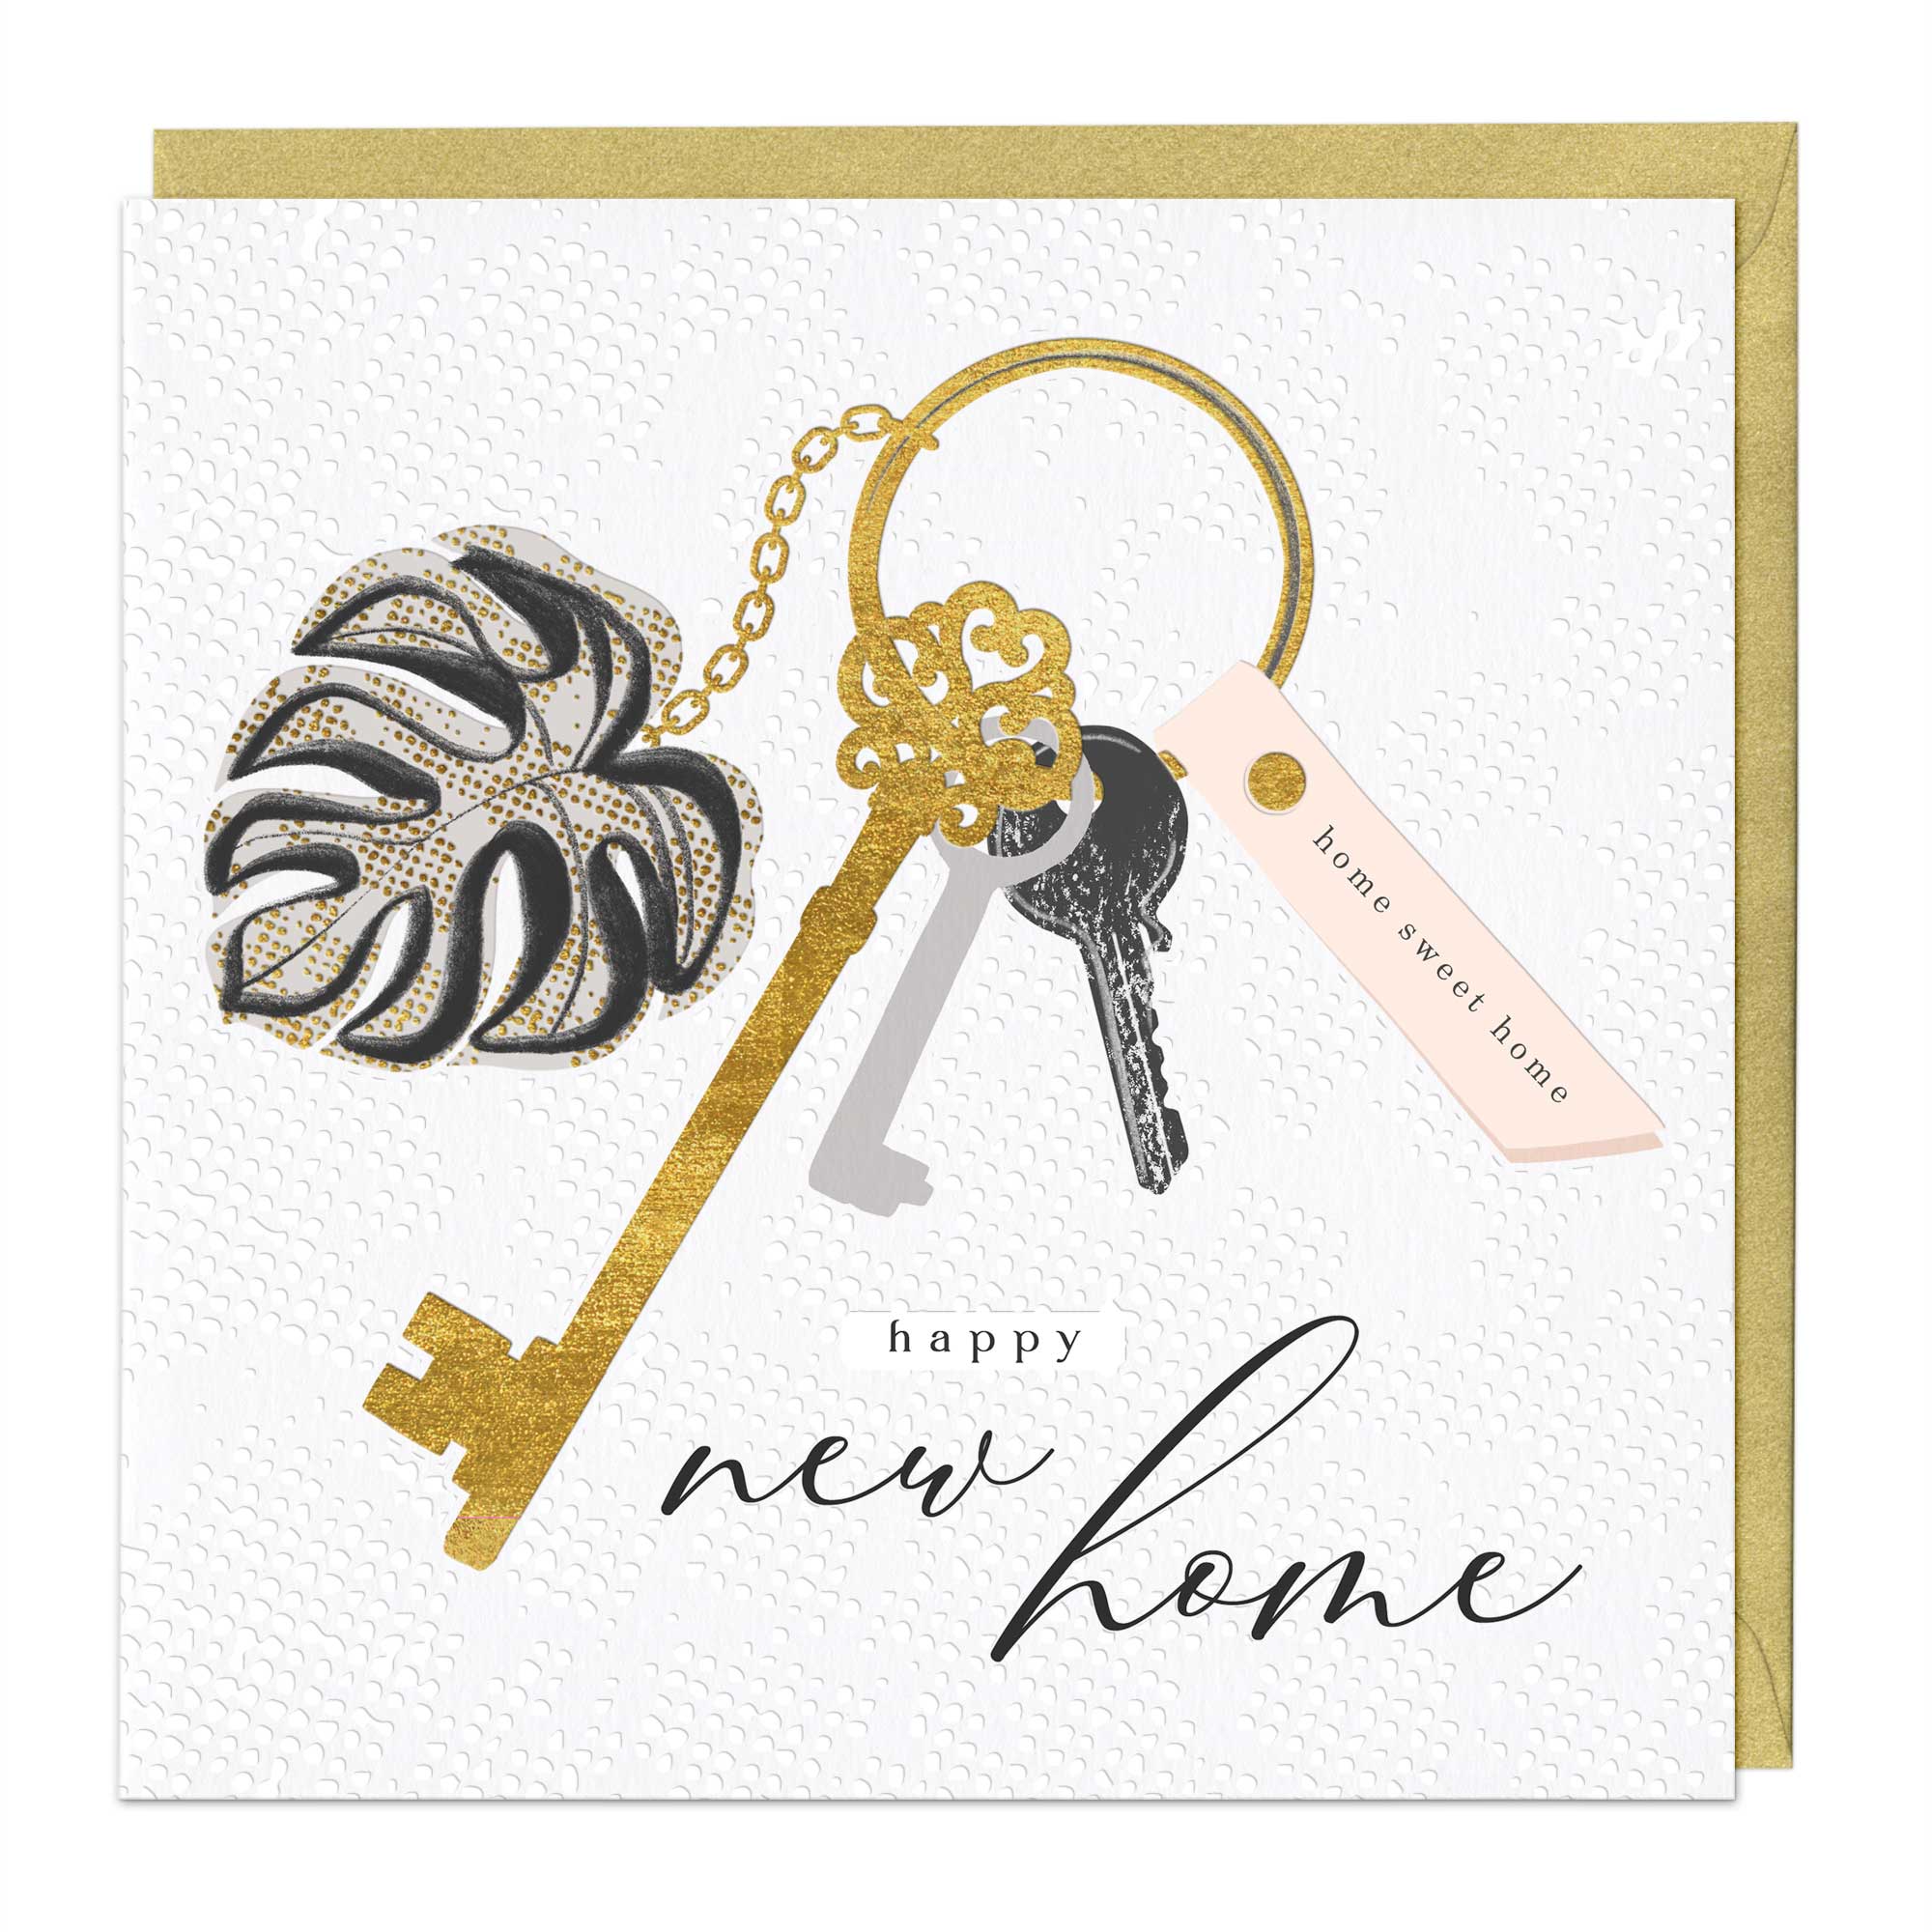 Key To Comfort New Home Luxury Card